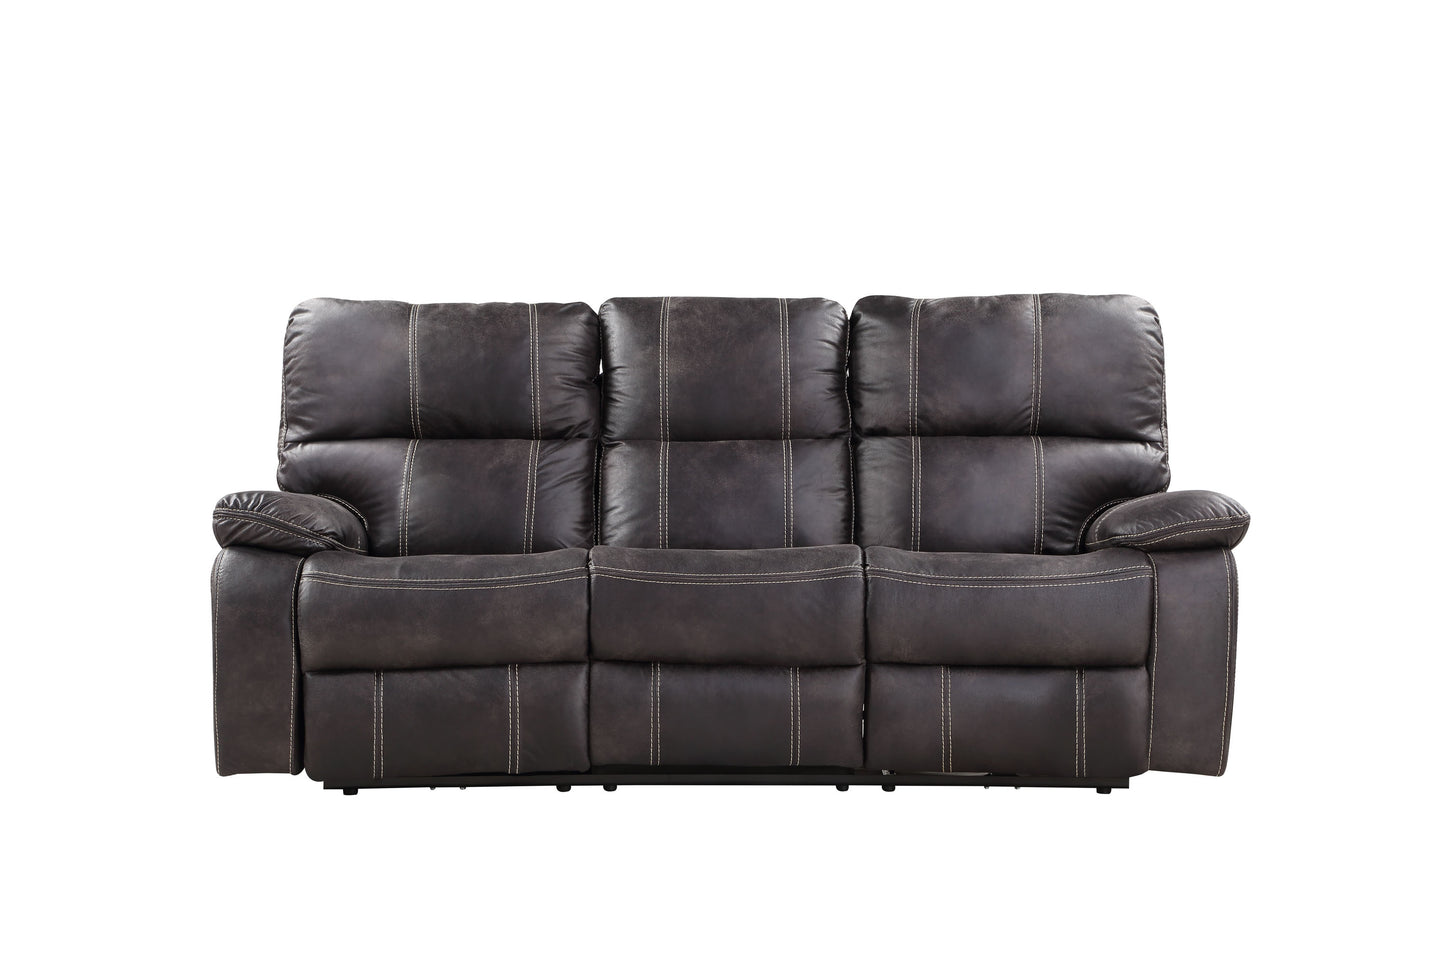 WEEKLY or MONTHLY. Jessie James Grey Power Couch Set